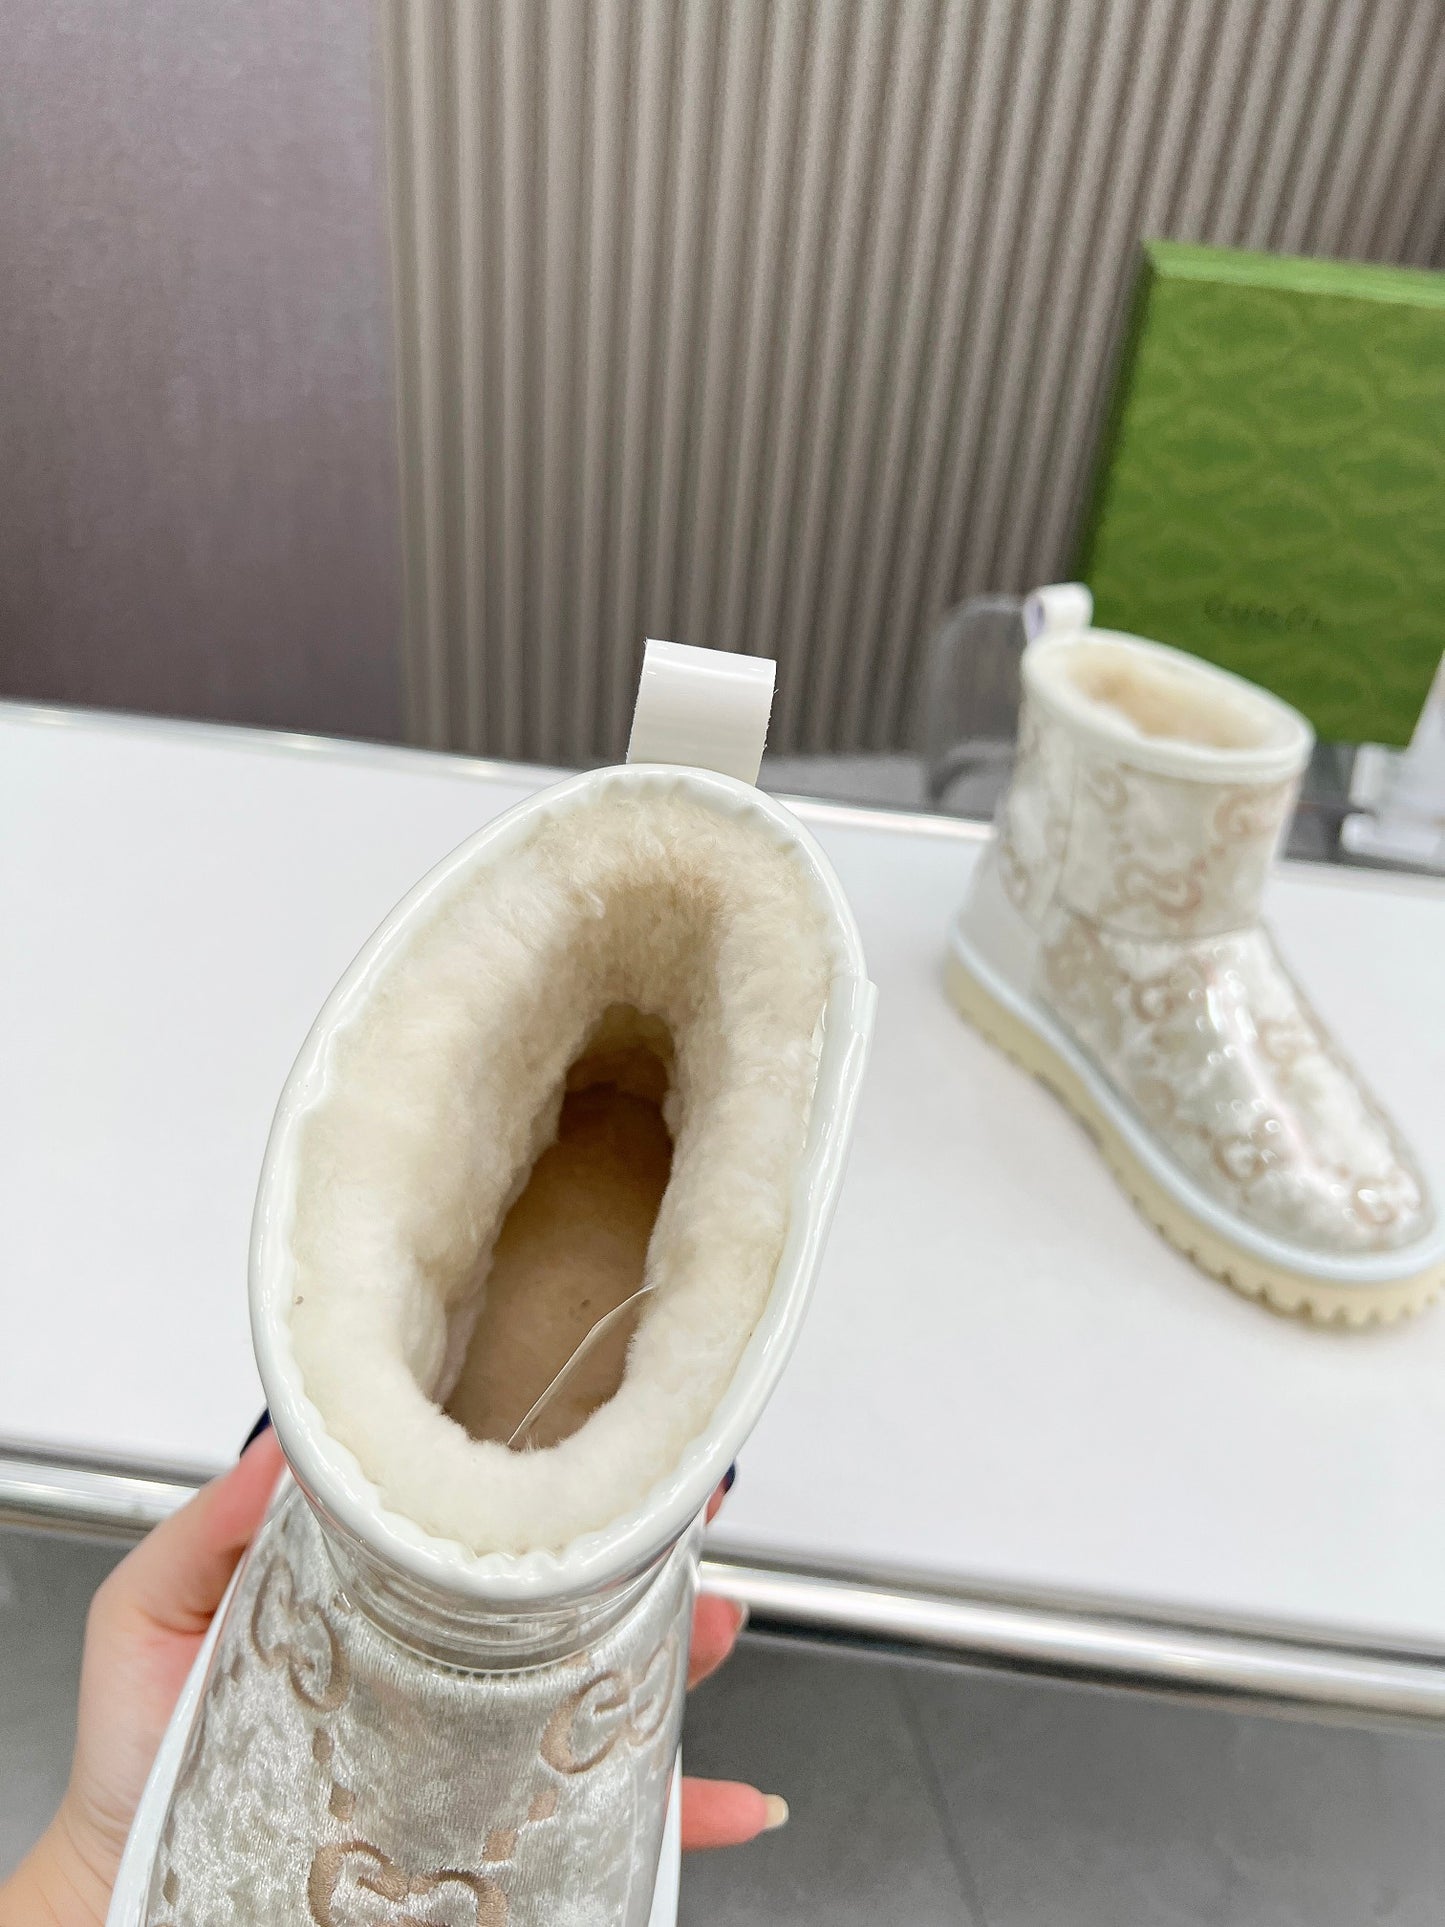 Ugg Boots Gucci Collab Creme